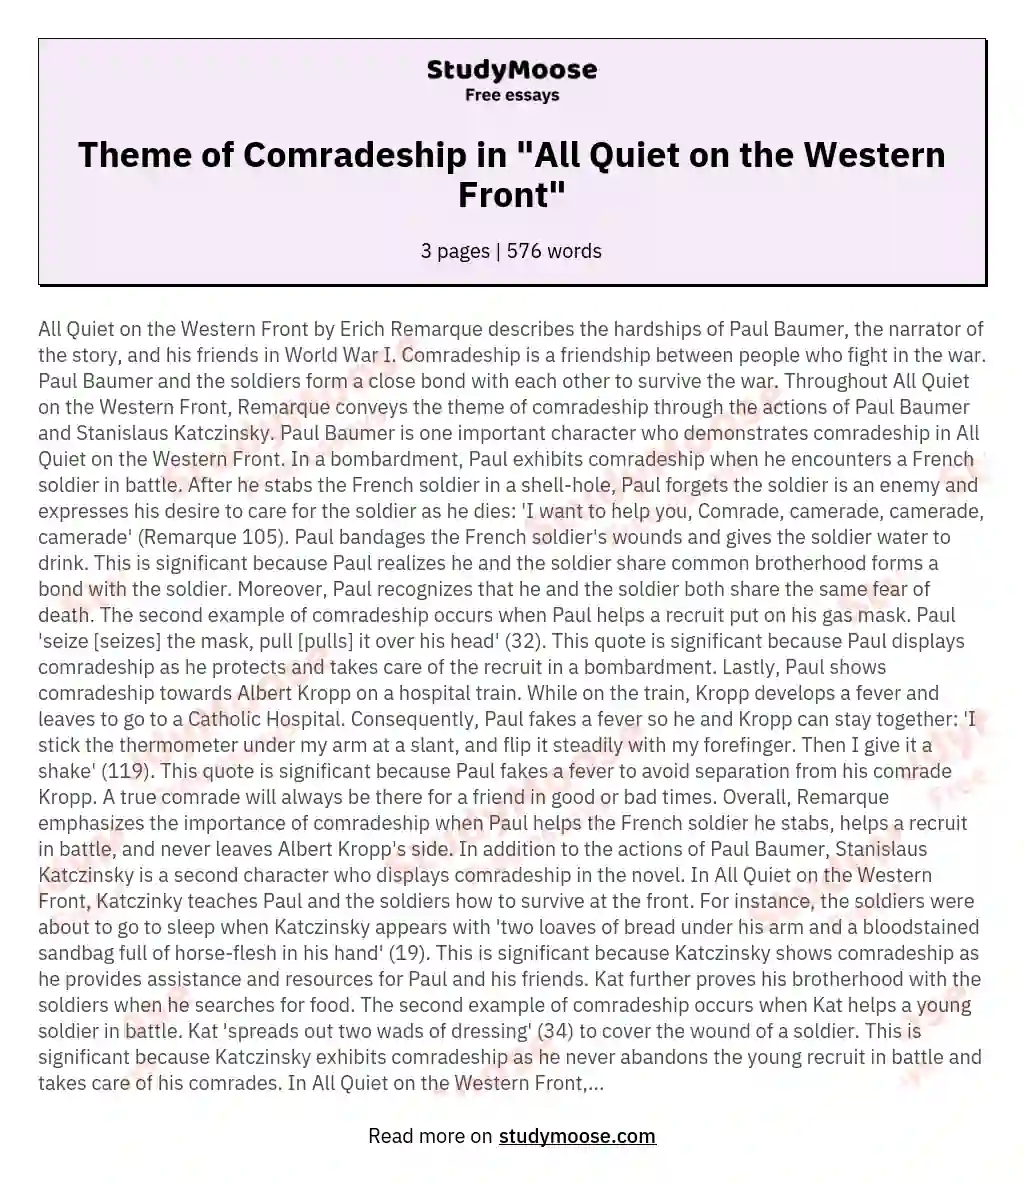 Theme of Comradeship in "All Quiet on the Western Front" essay